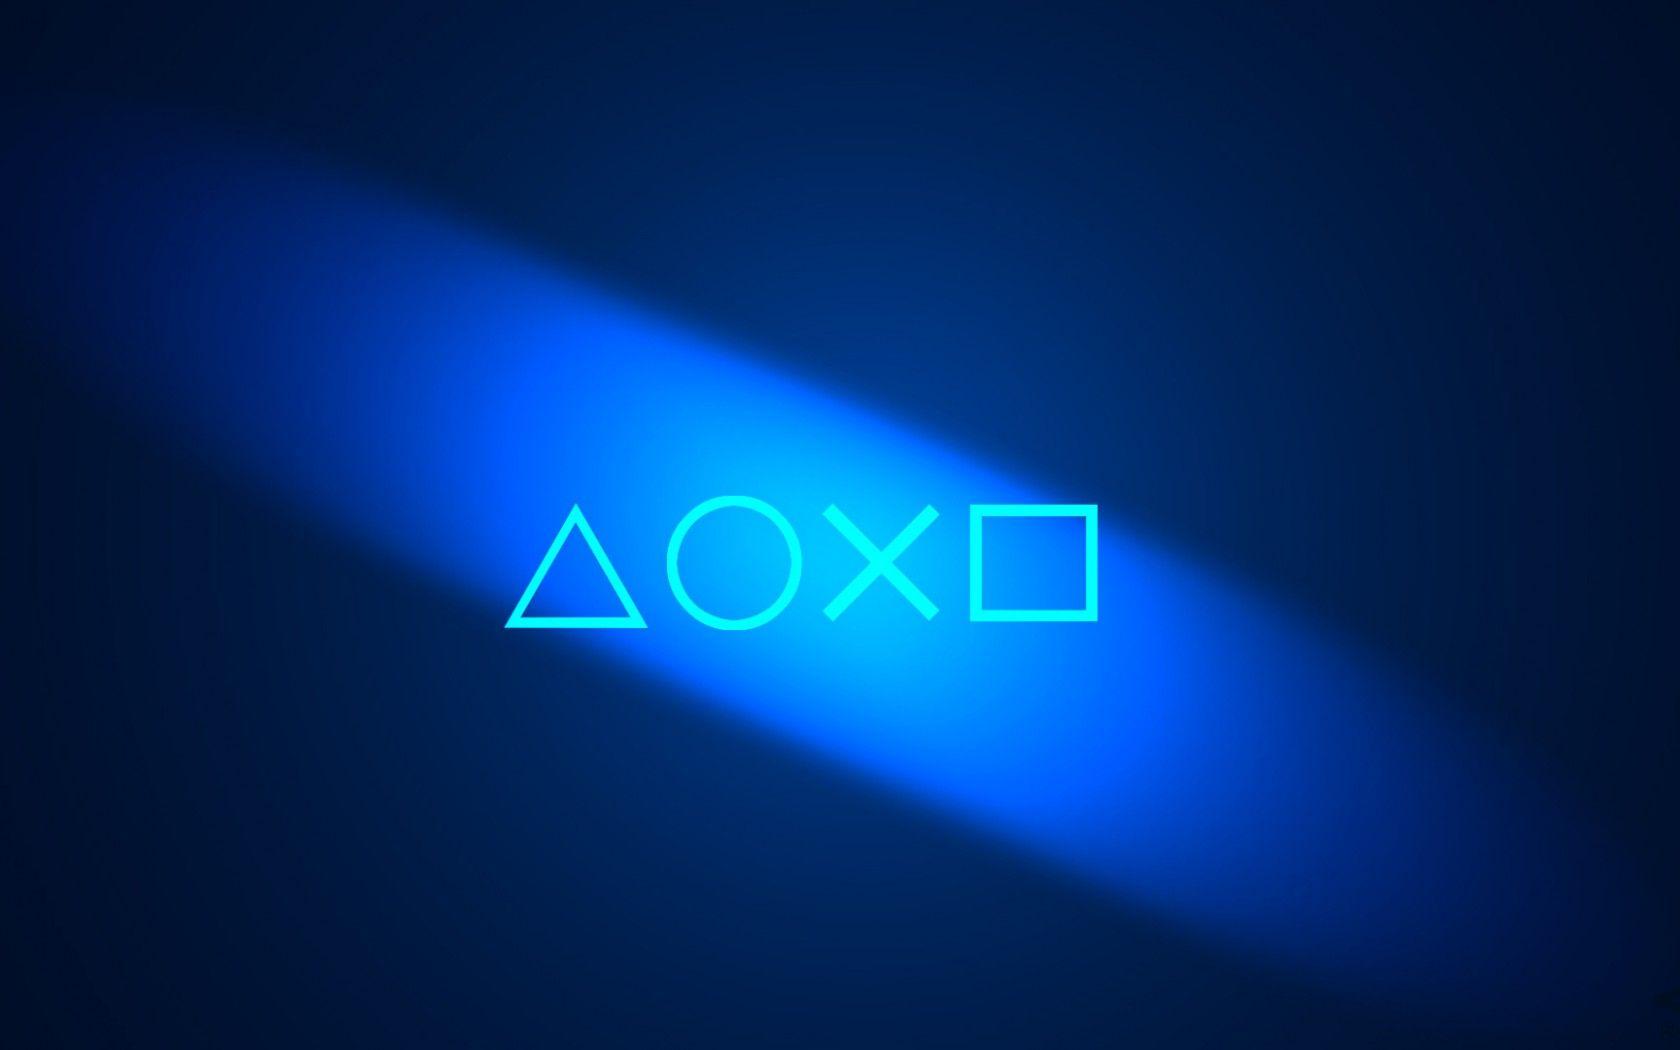 Blue PS4 Wallpaper Free Blue PS4 Background